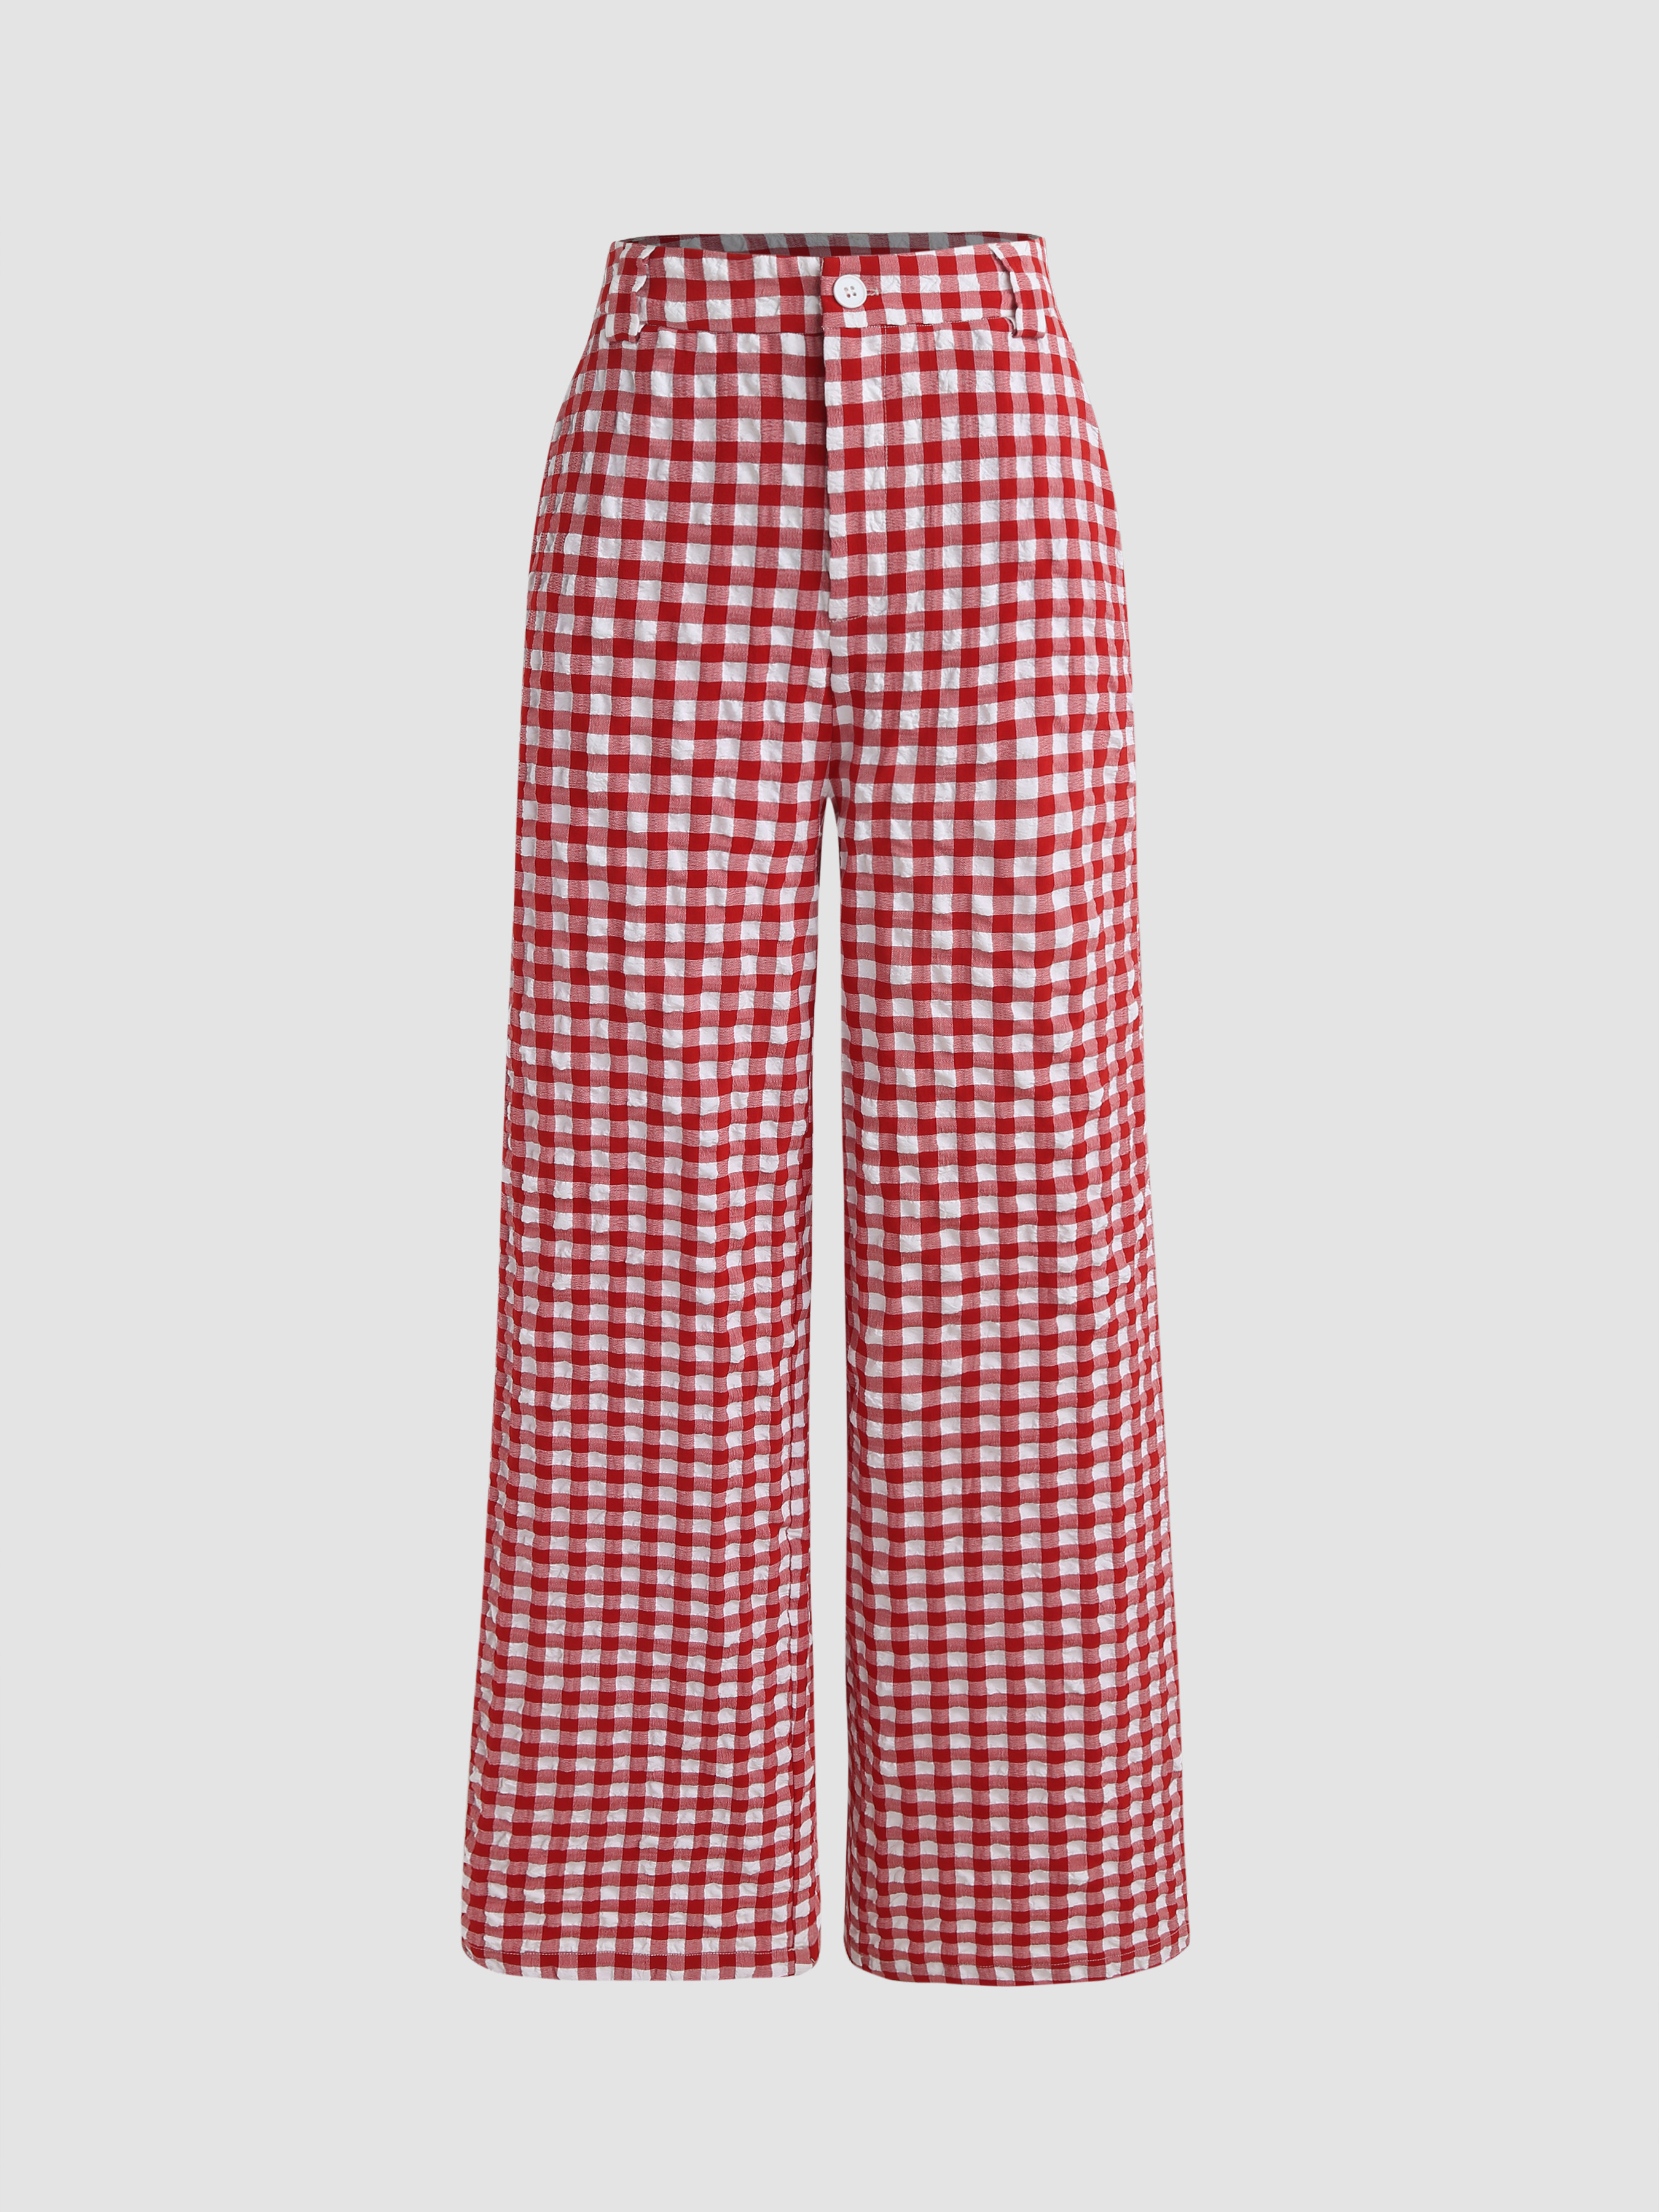 Style 193626 - Black, grey and red check trousers